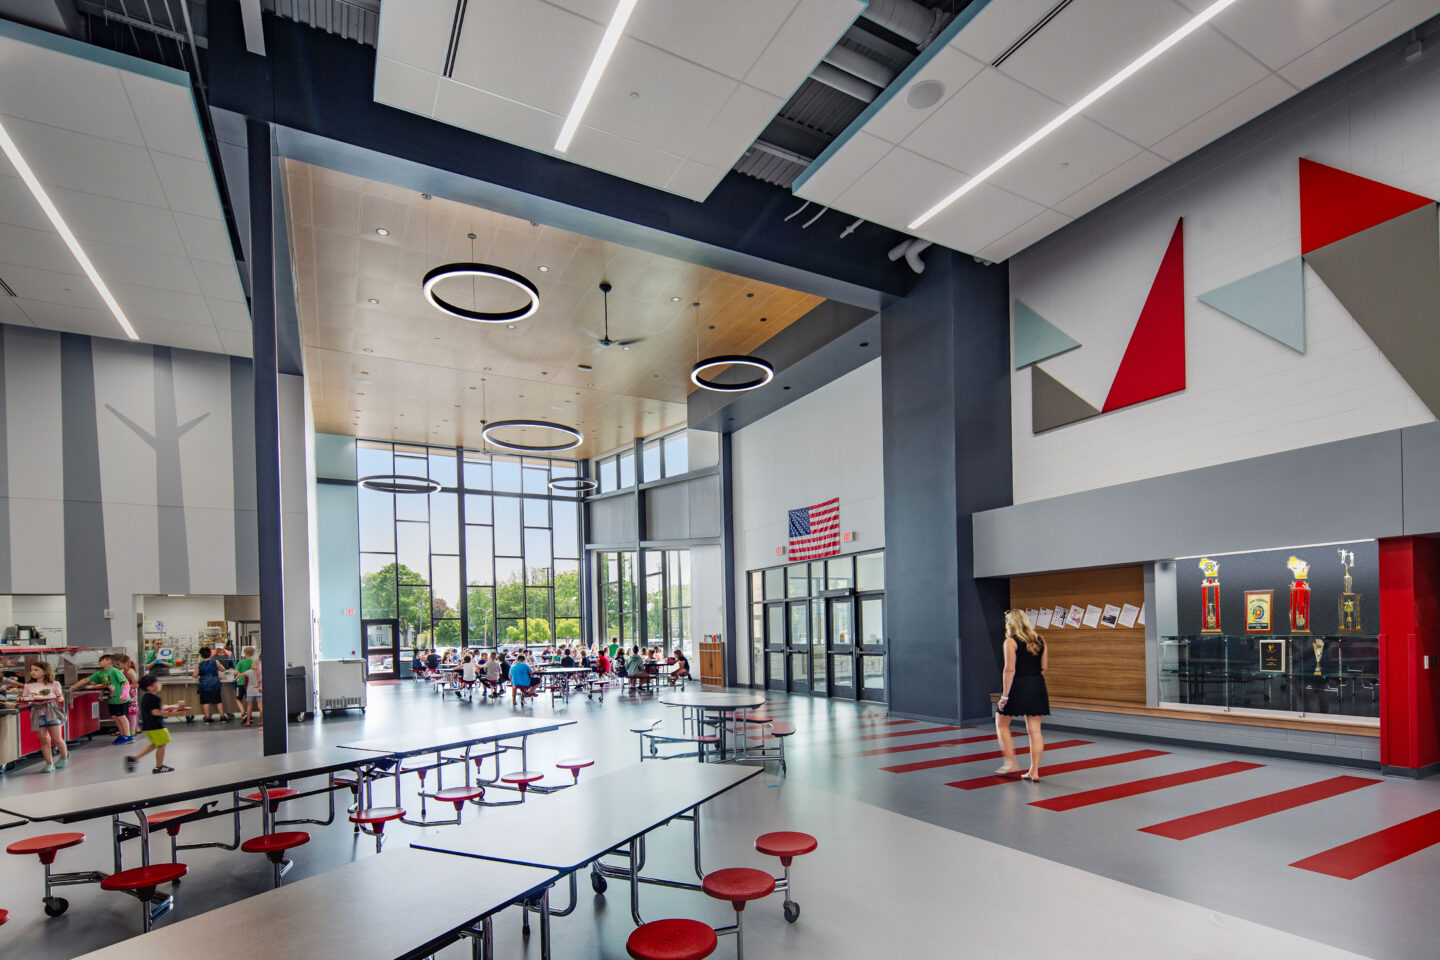 Cafeteria and front entrance doors with circular ceiling lights at Columbus Elementary School